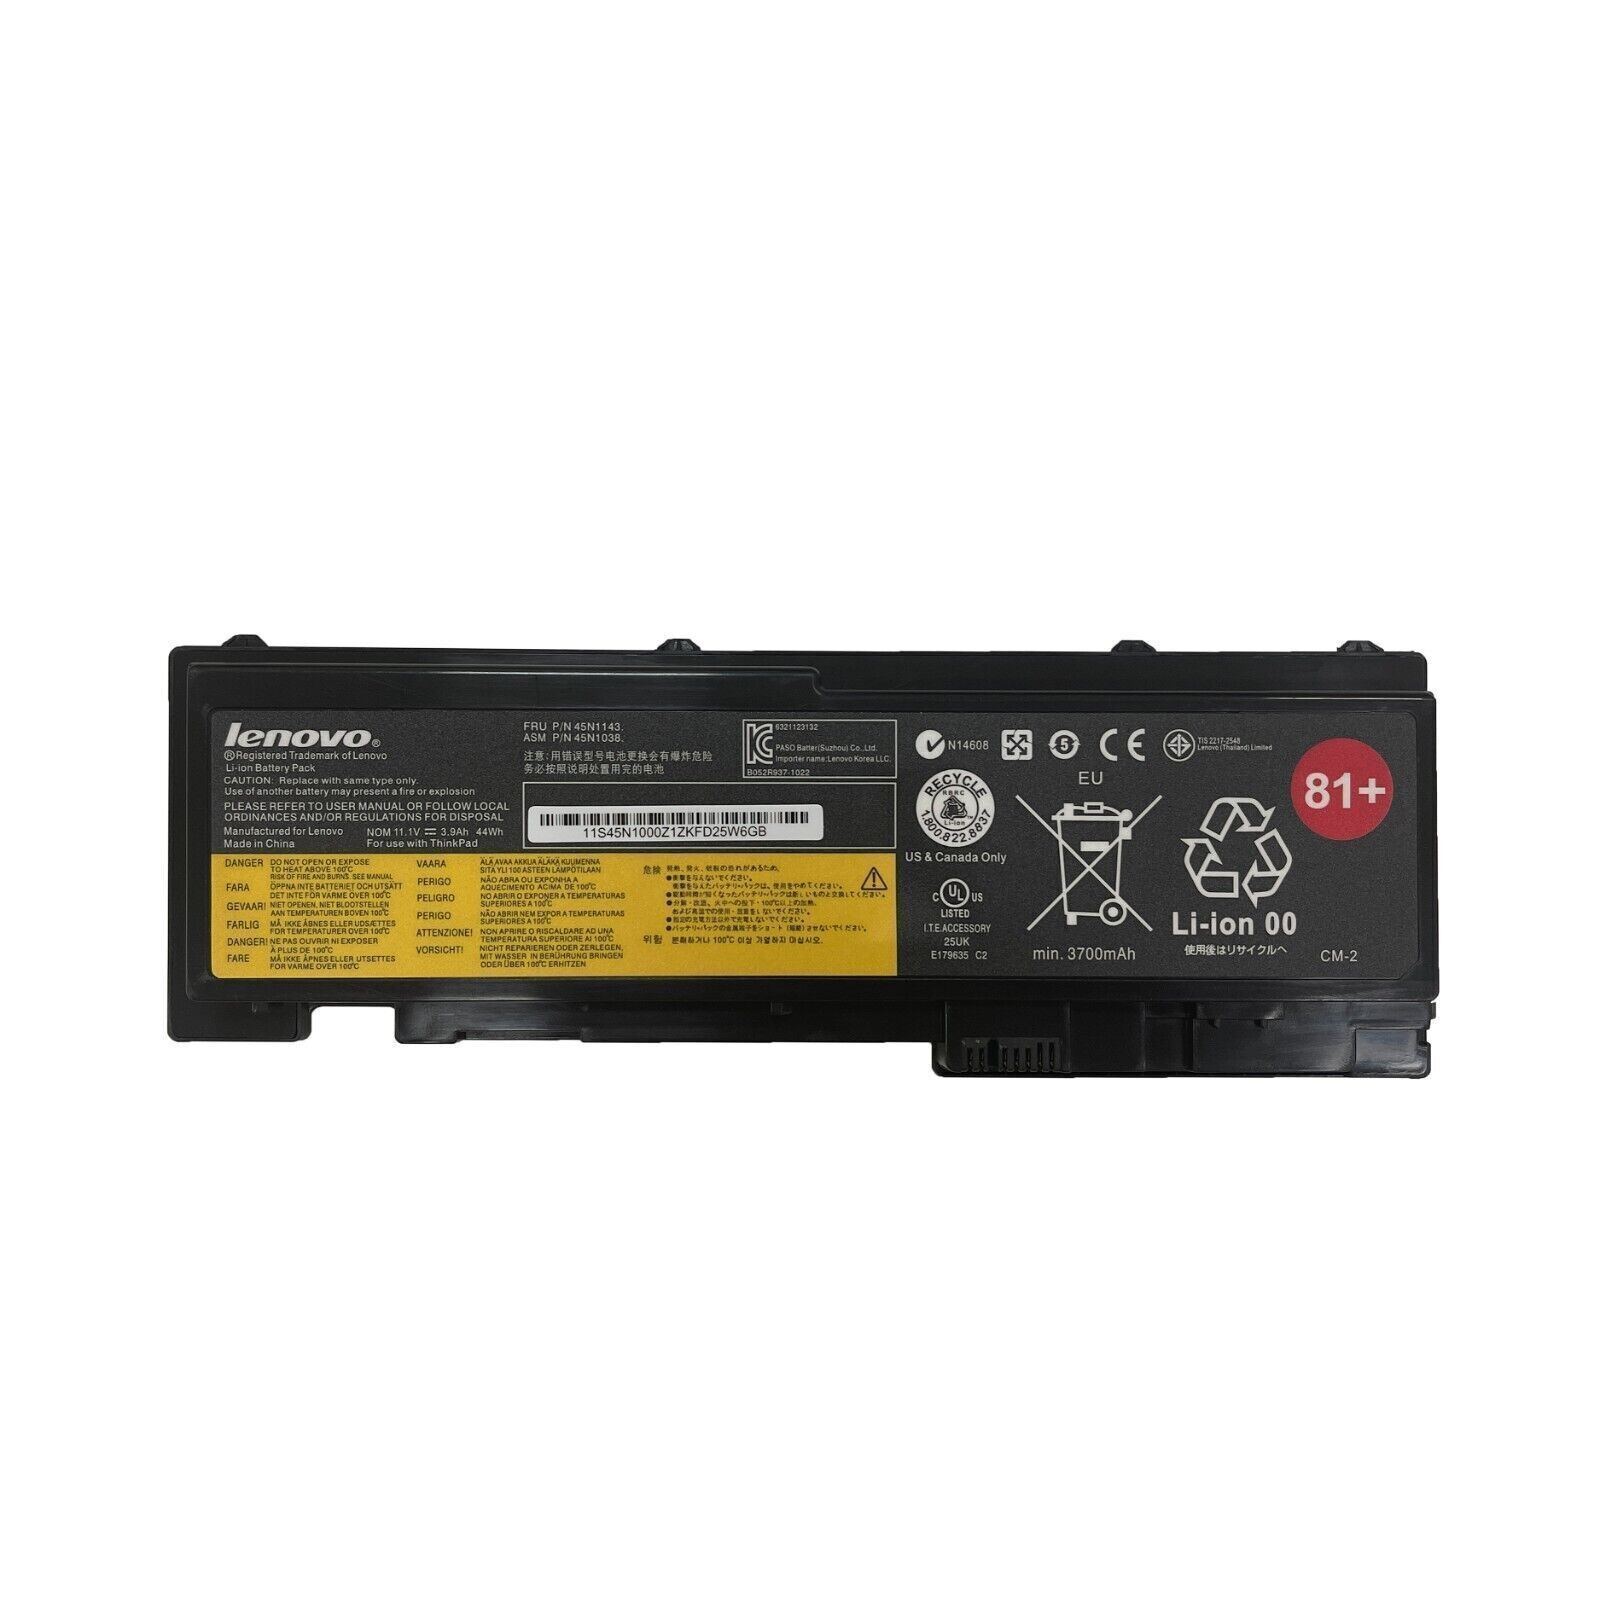 81+ OEM T430s Battery For Lenovo ThinkPad T420s T420i 0A36287 42T4847 42T4846